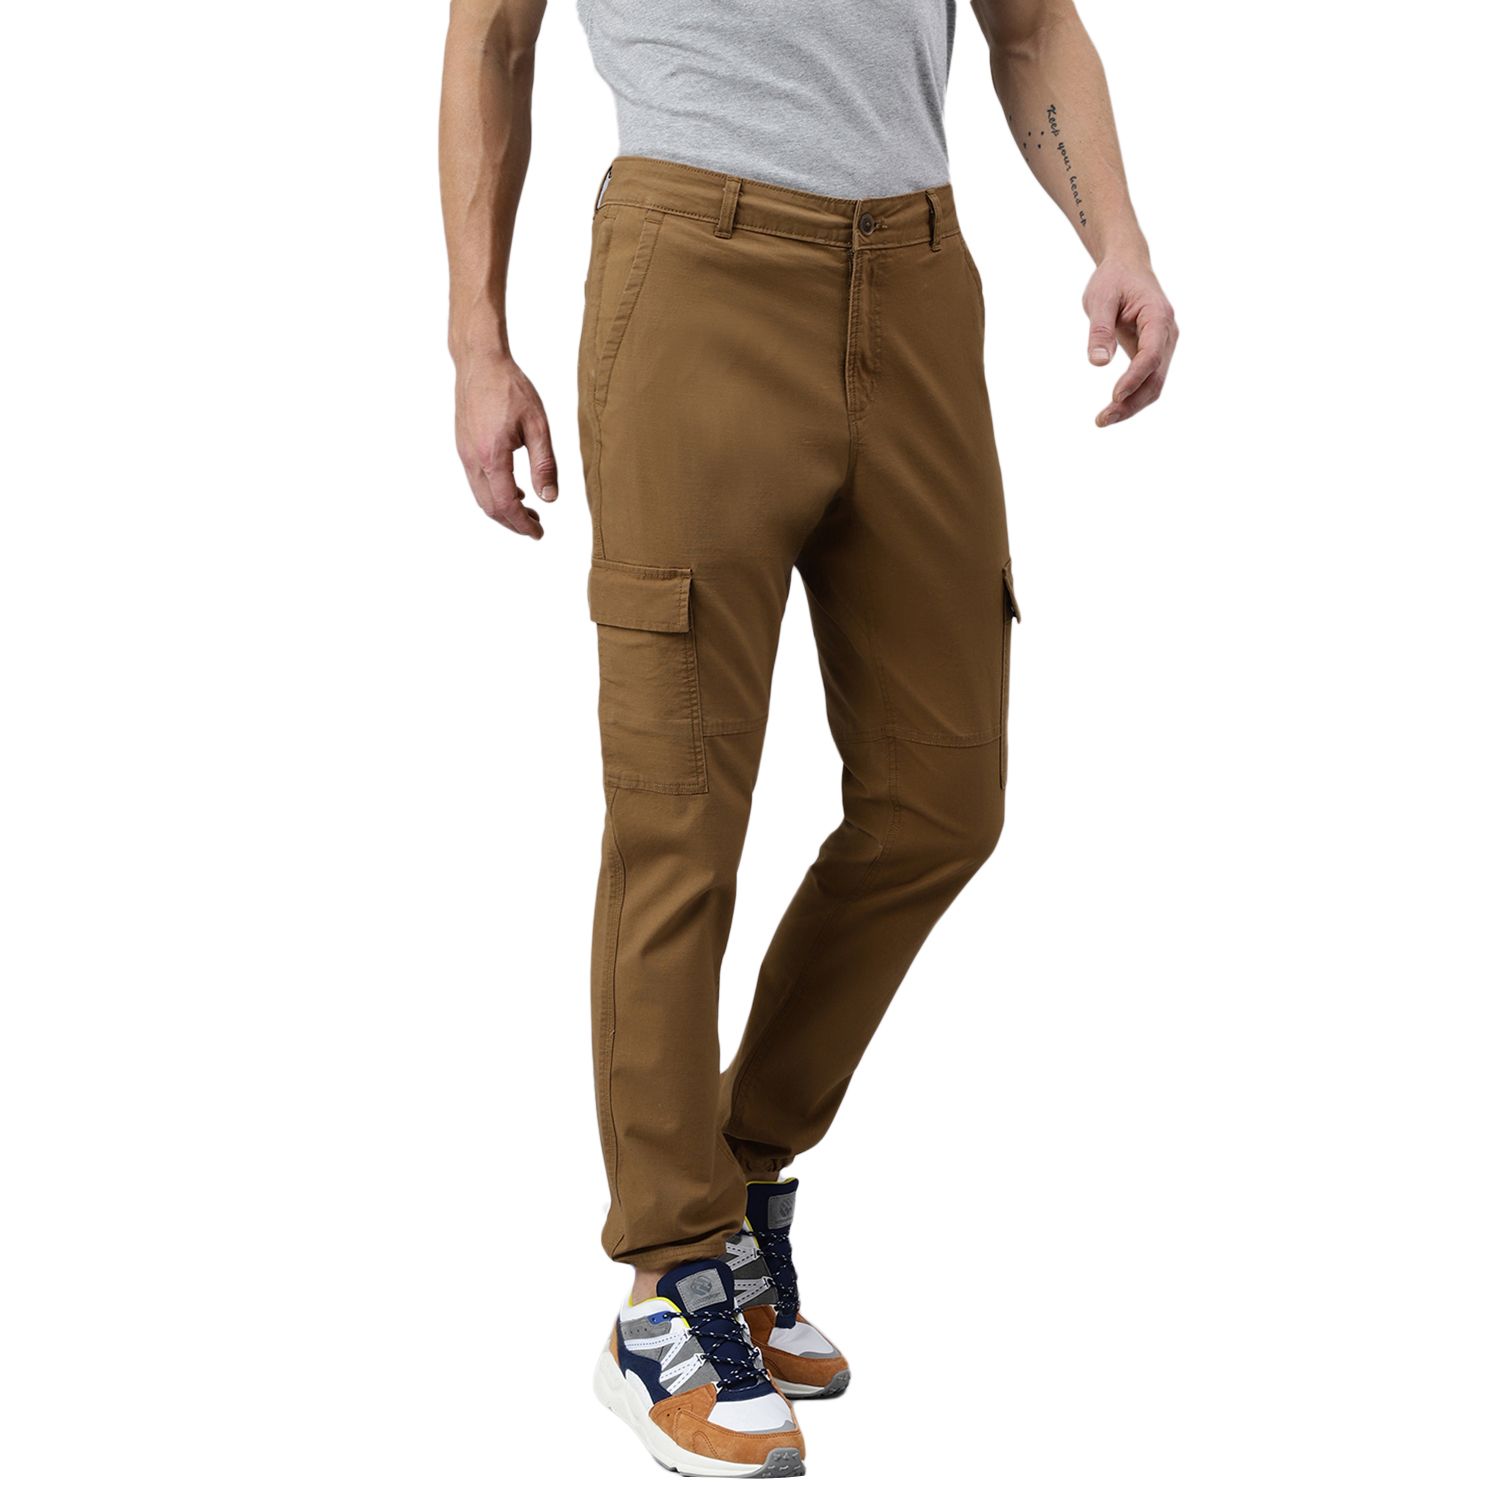 camel cargos for men 2 397 mrp 3 995 40 % off prices include taxes ...